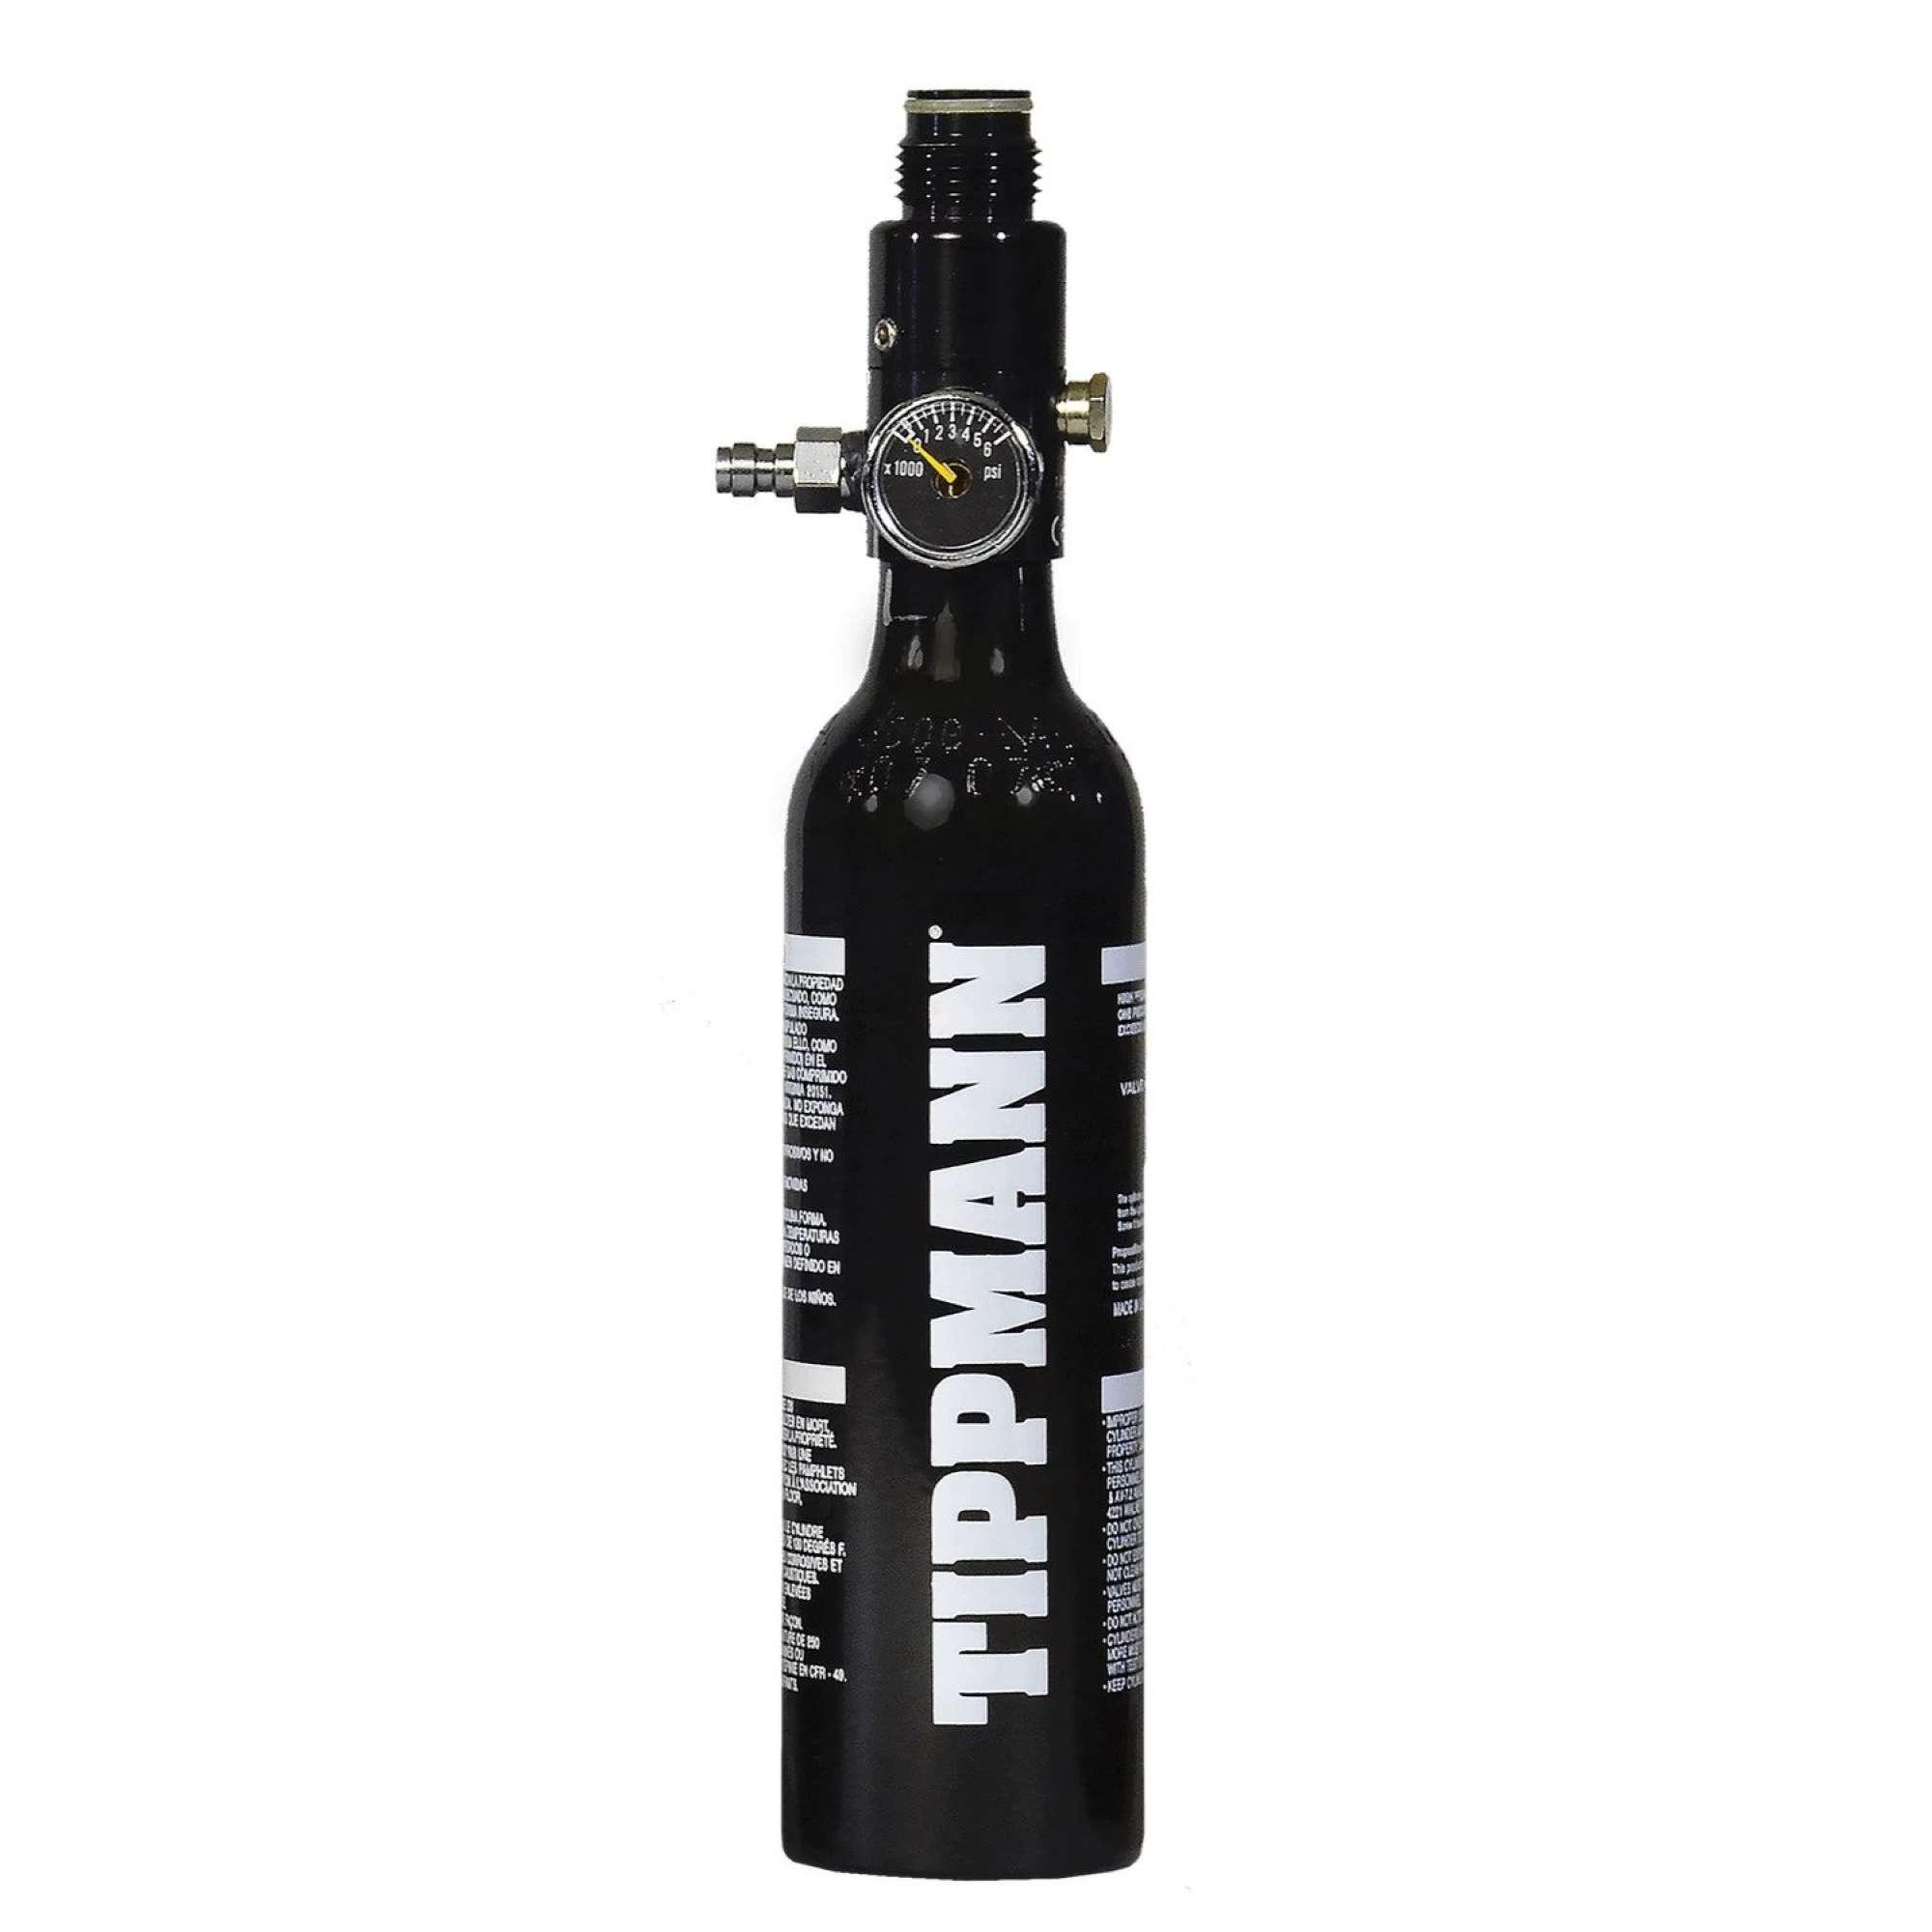 Tippmann 13ci HPA Tank for Paintball and Airsoft